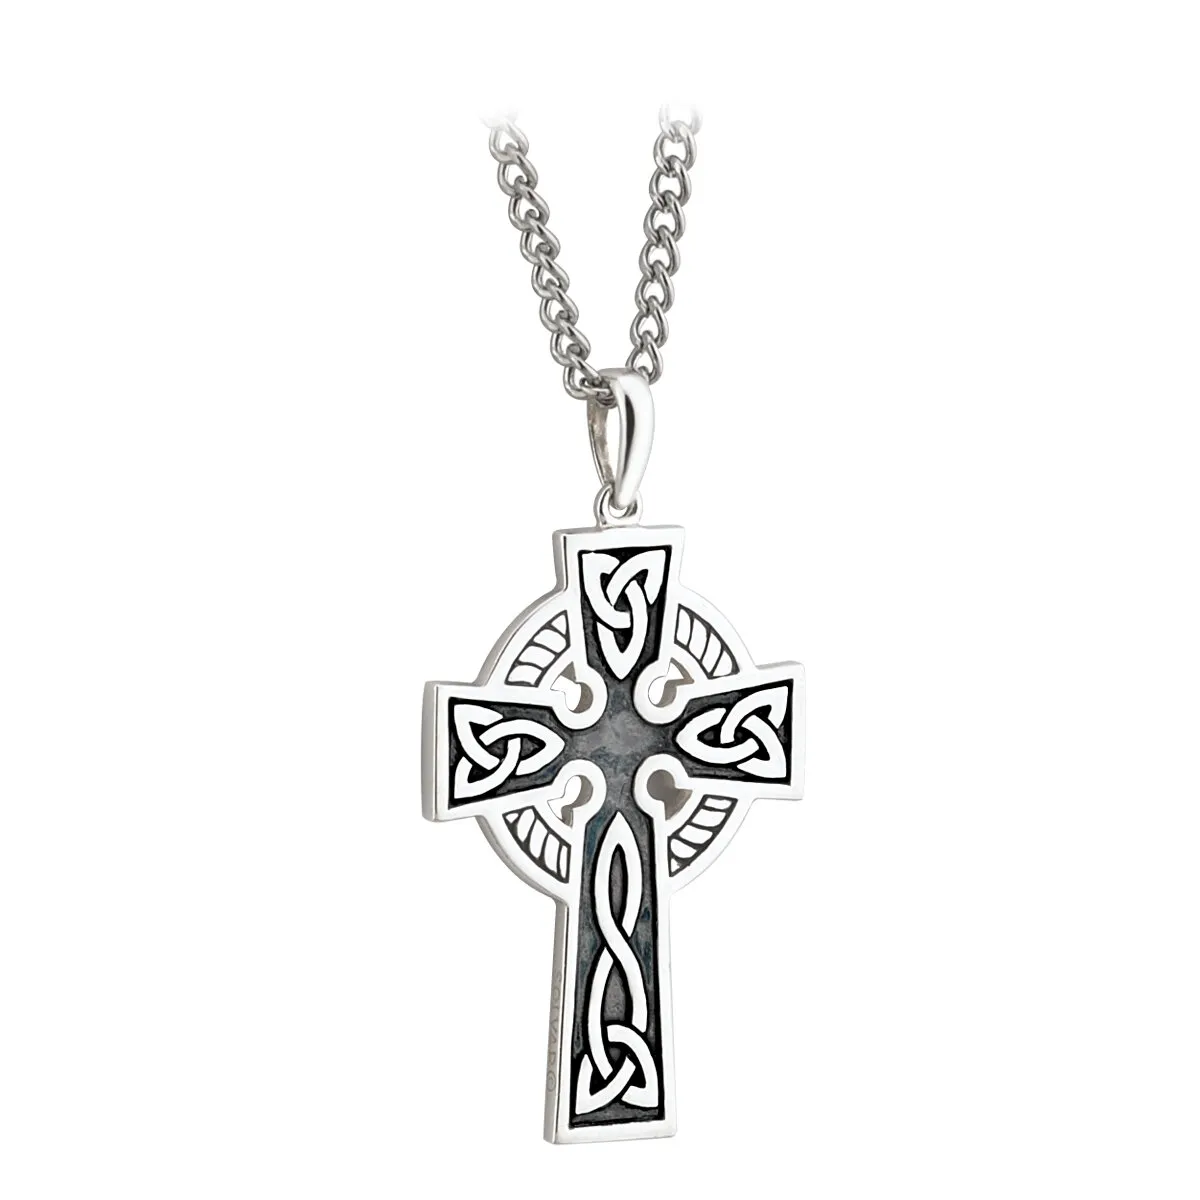 Oxidized Sterling Silver Double Sided Celtic Cross Pendant...